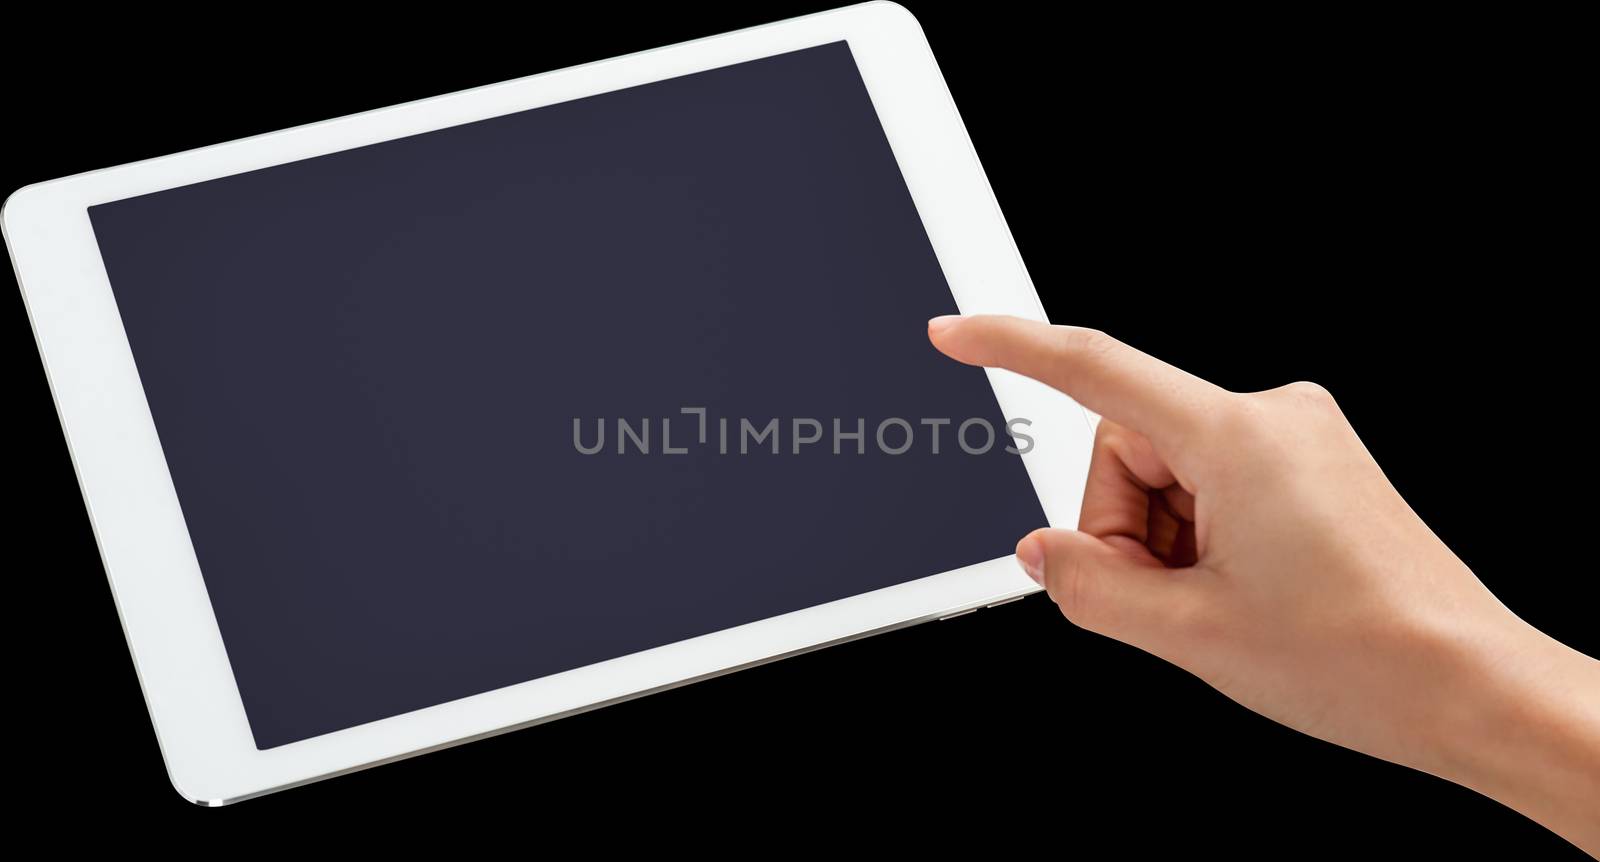 Finger being pointed on tablet screen by stockyimages